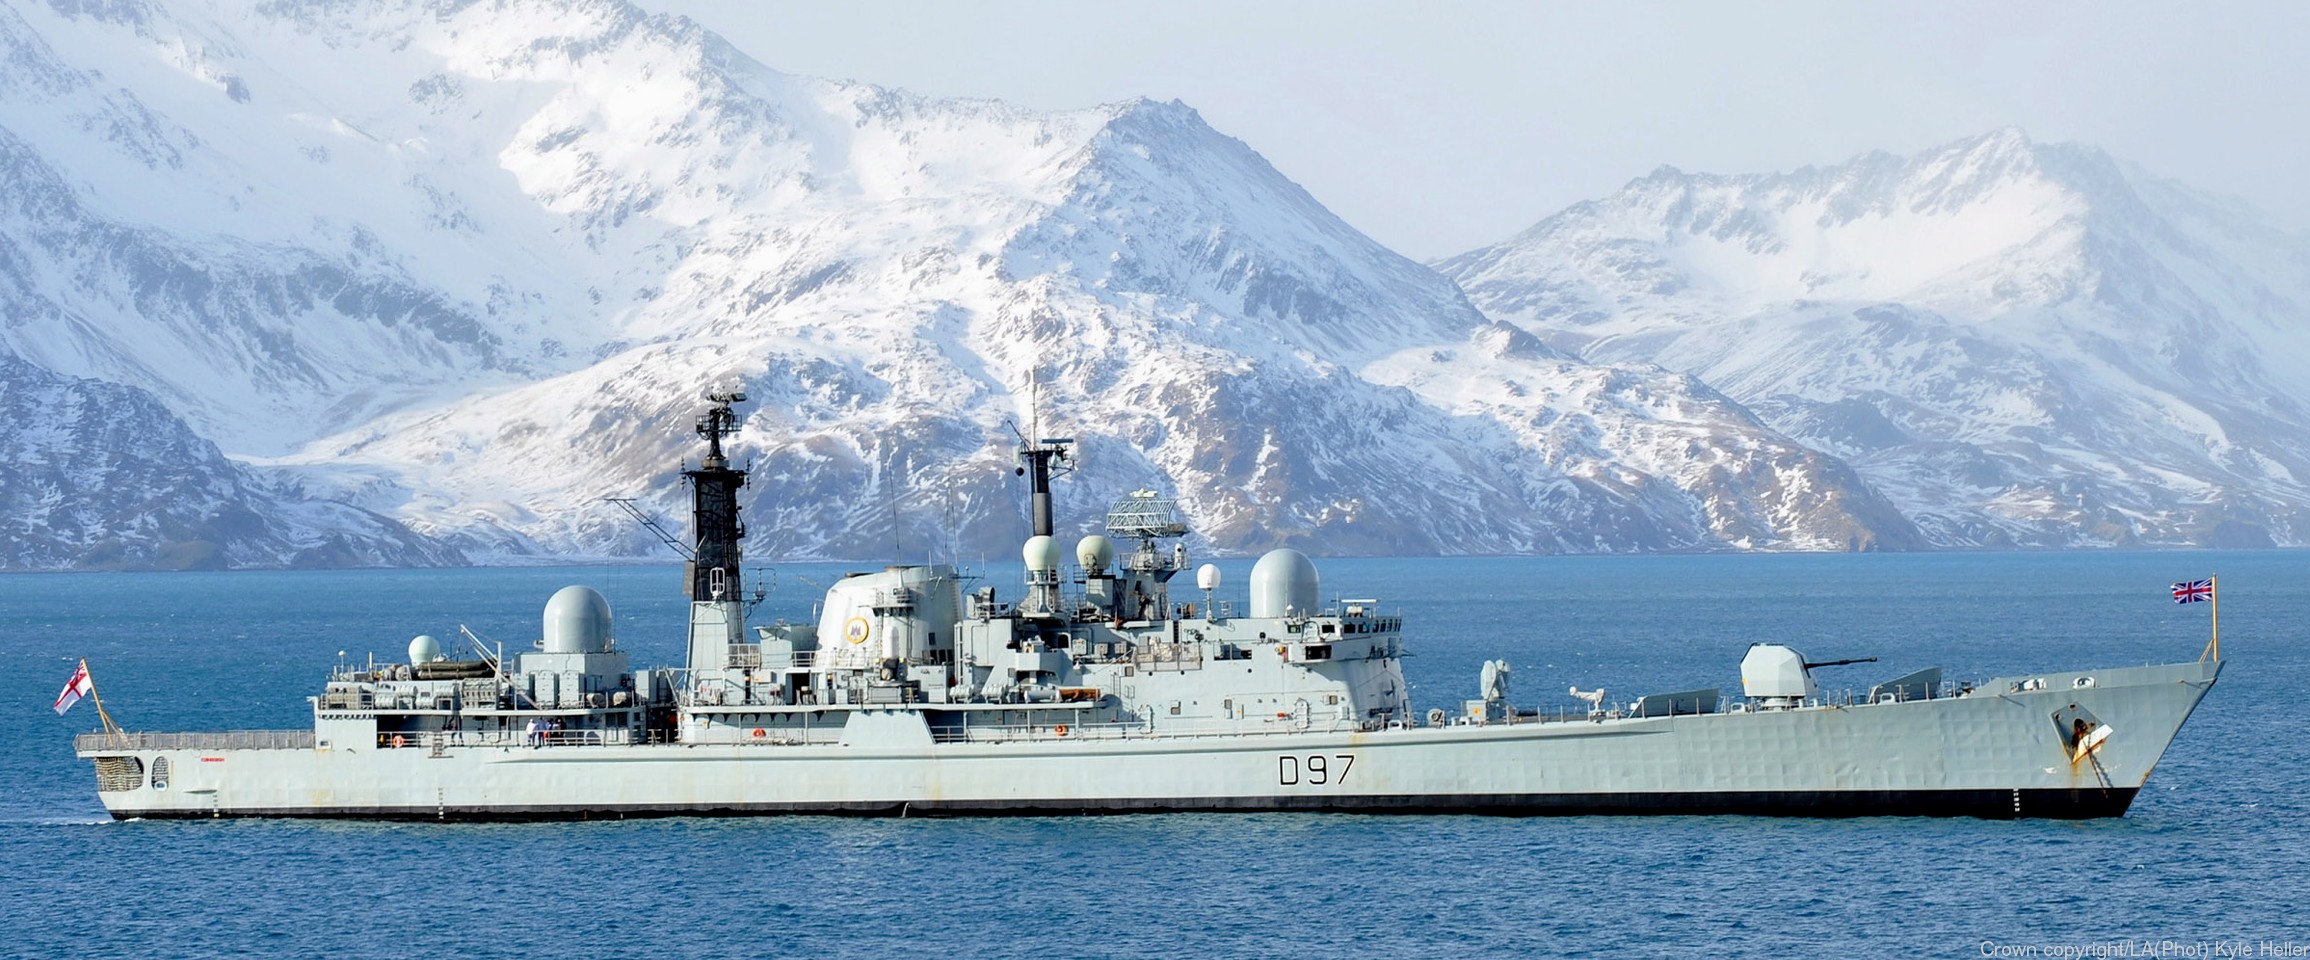 Sheffield class Type 42 Guided Missile Destroyer - Royal Navy